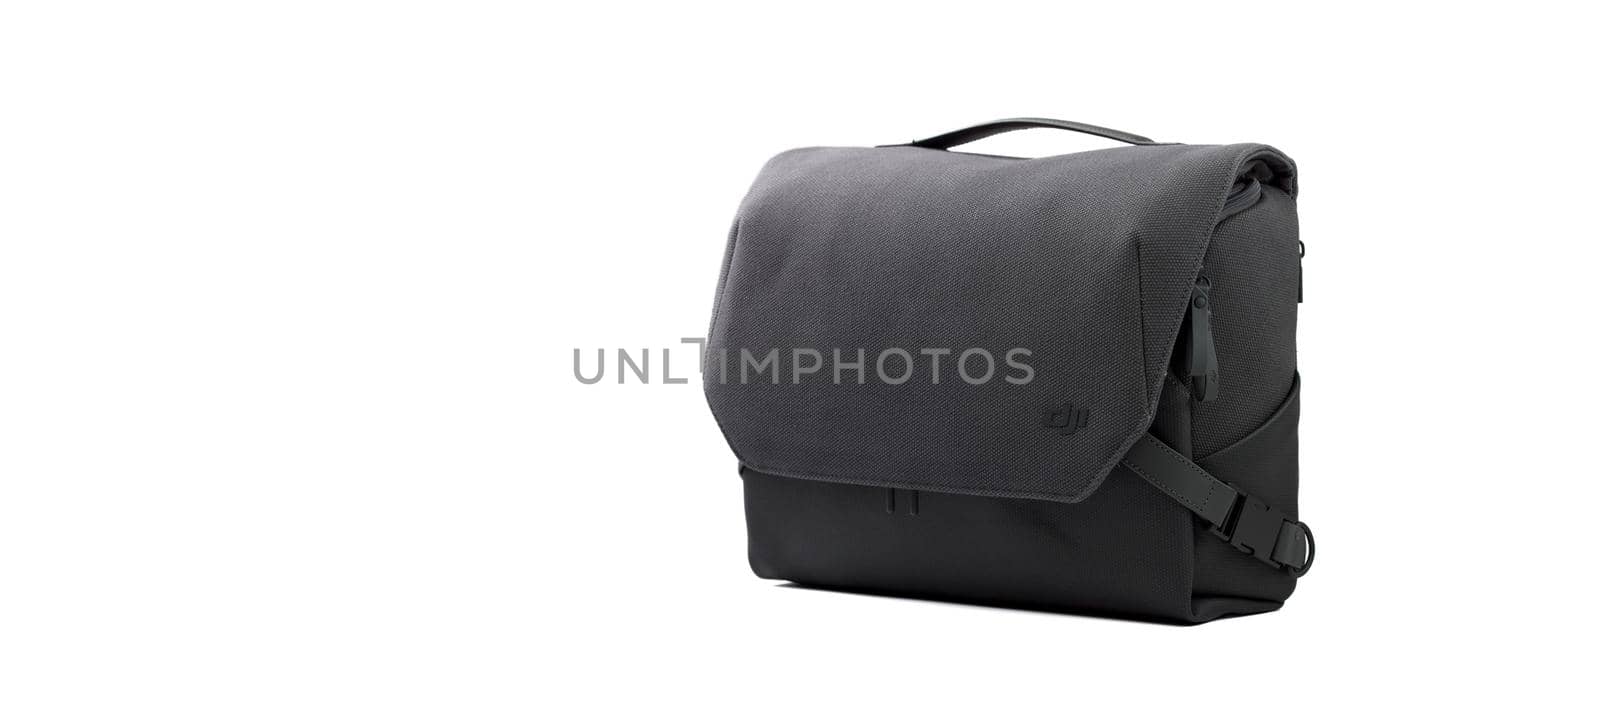 Drone bag isolated on white. Accessory for carrying and storing the quadcopter by EvgeniyQW